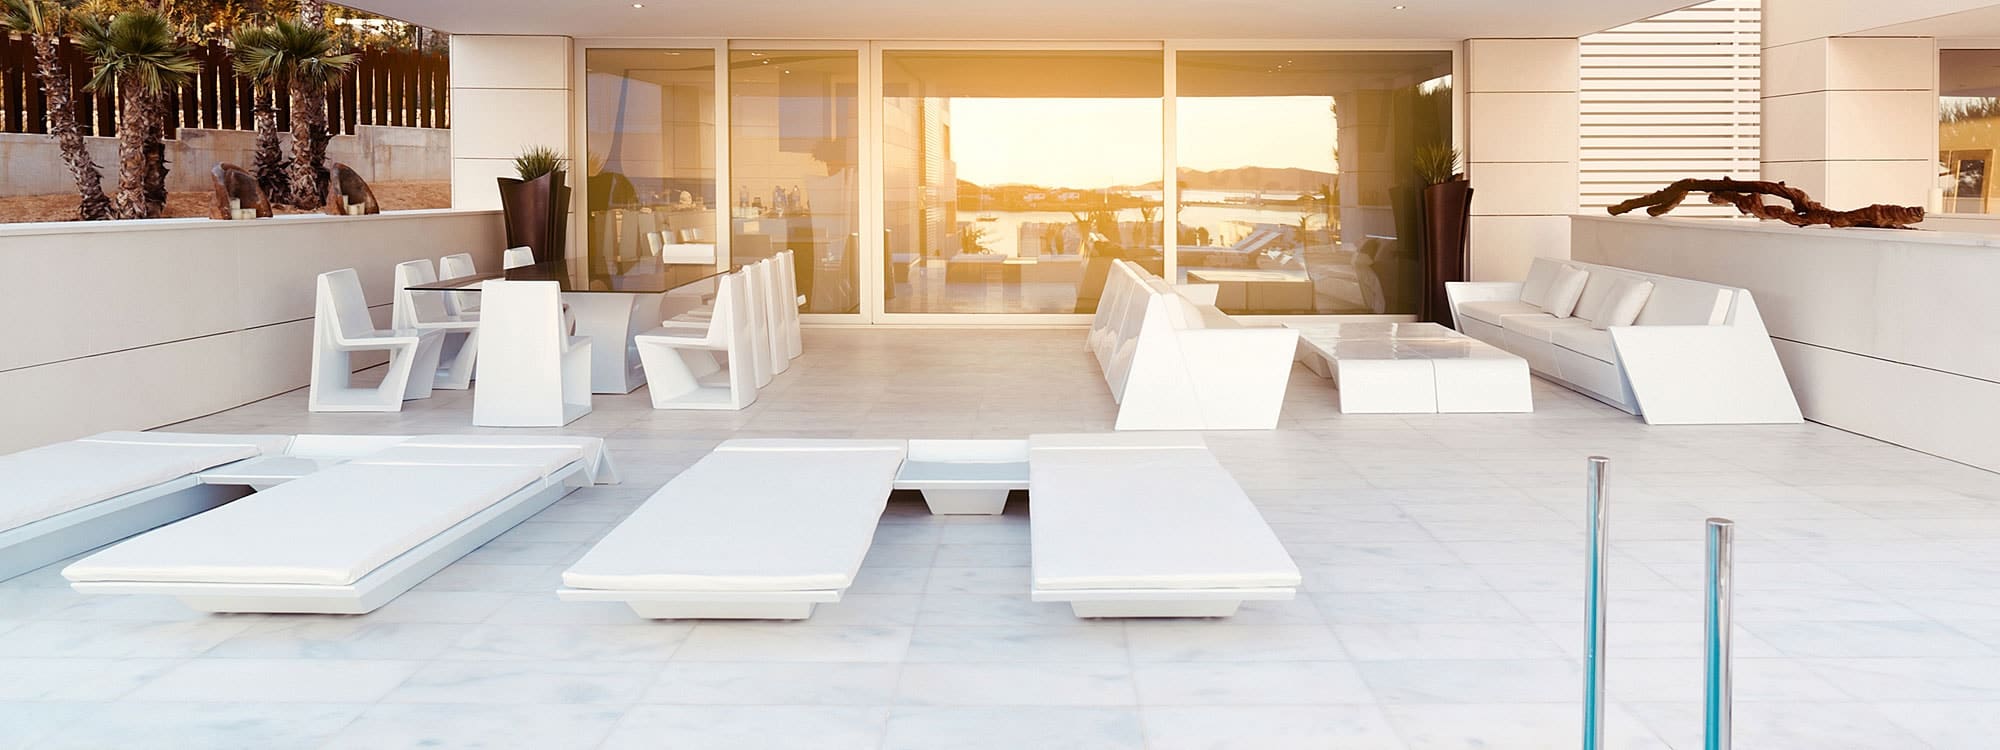 Image of modern terrace in late afternoon sun, with Rest garden dining furniture, outdoor sofas and white dining set by Vondom